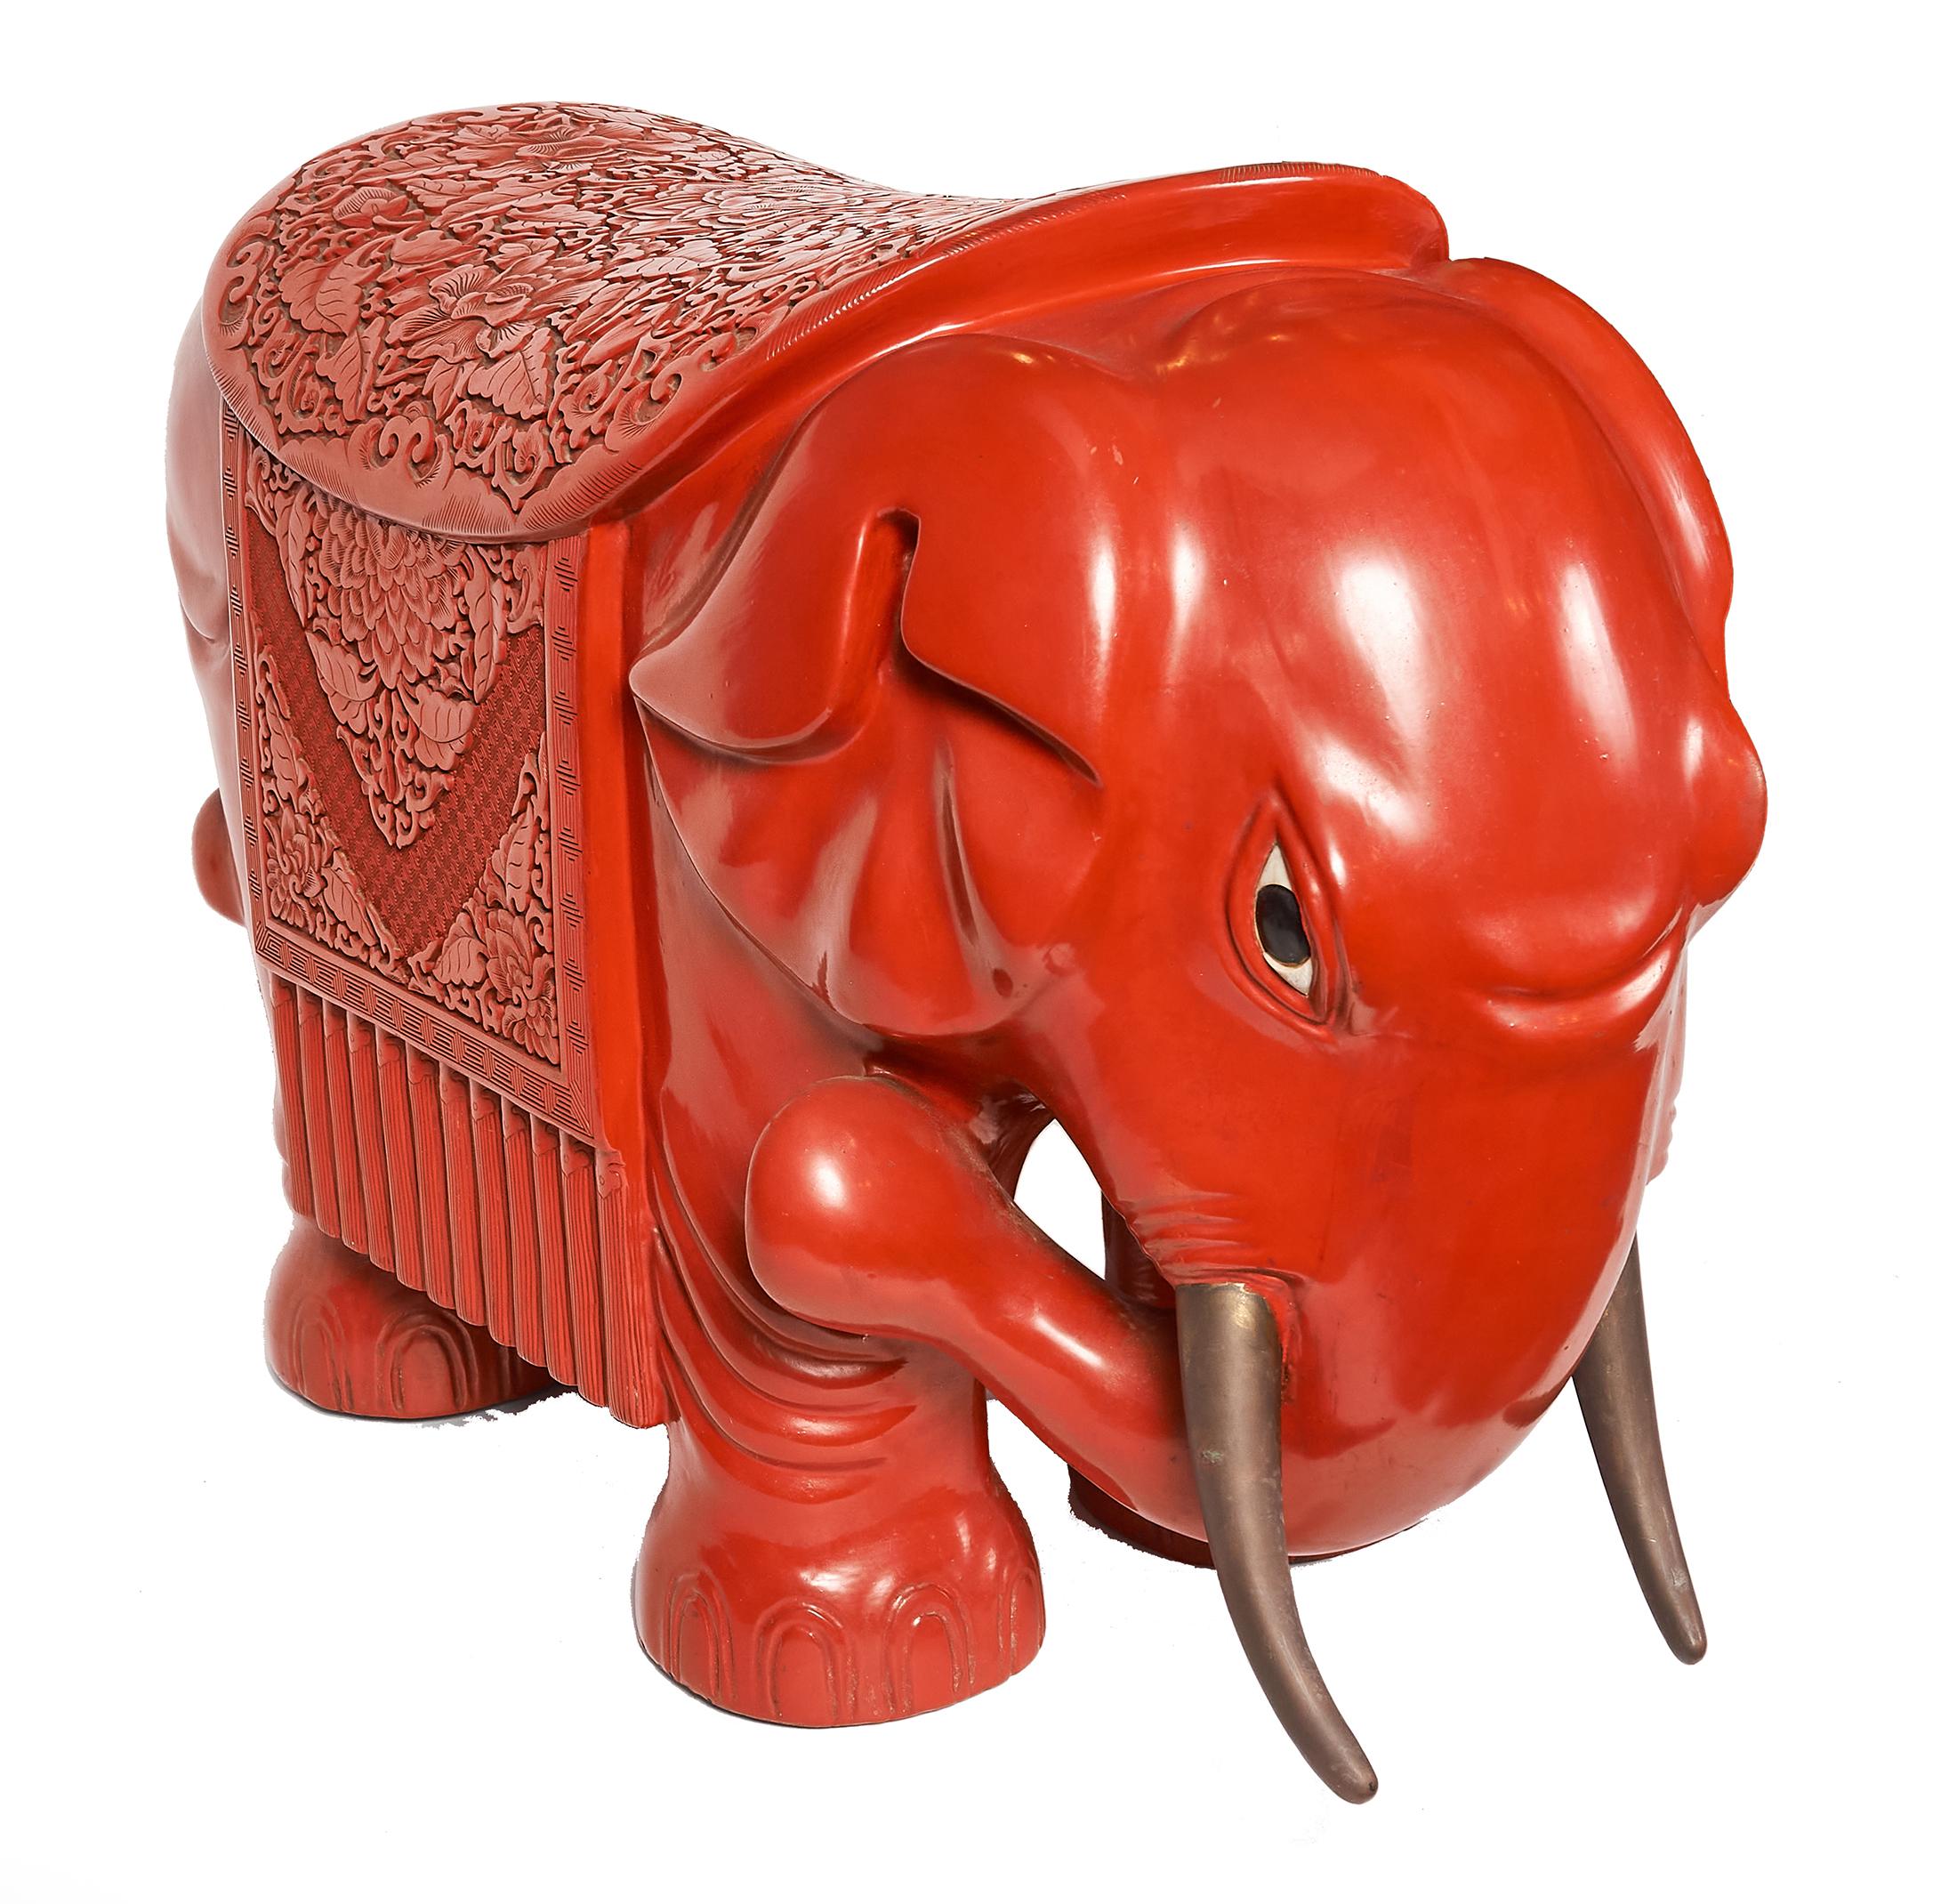 This brightly colored Asian elephant garden stool is a strong, vibrant piece to add to any indoor or outdoor area. Exquisitely carved, this red cinnabar elephant is a regal addition to an Asian art collection or modern home and is fully functional